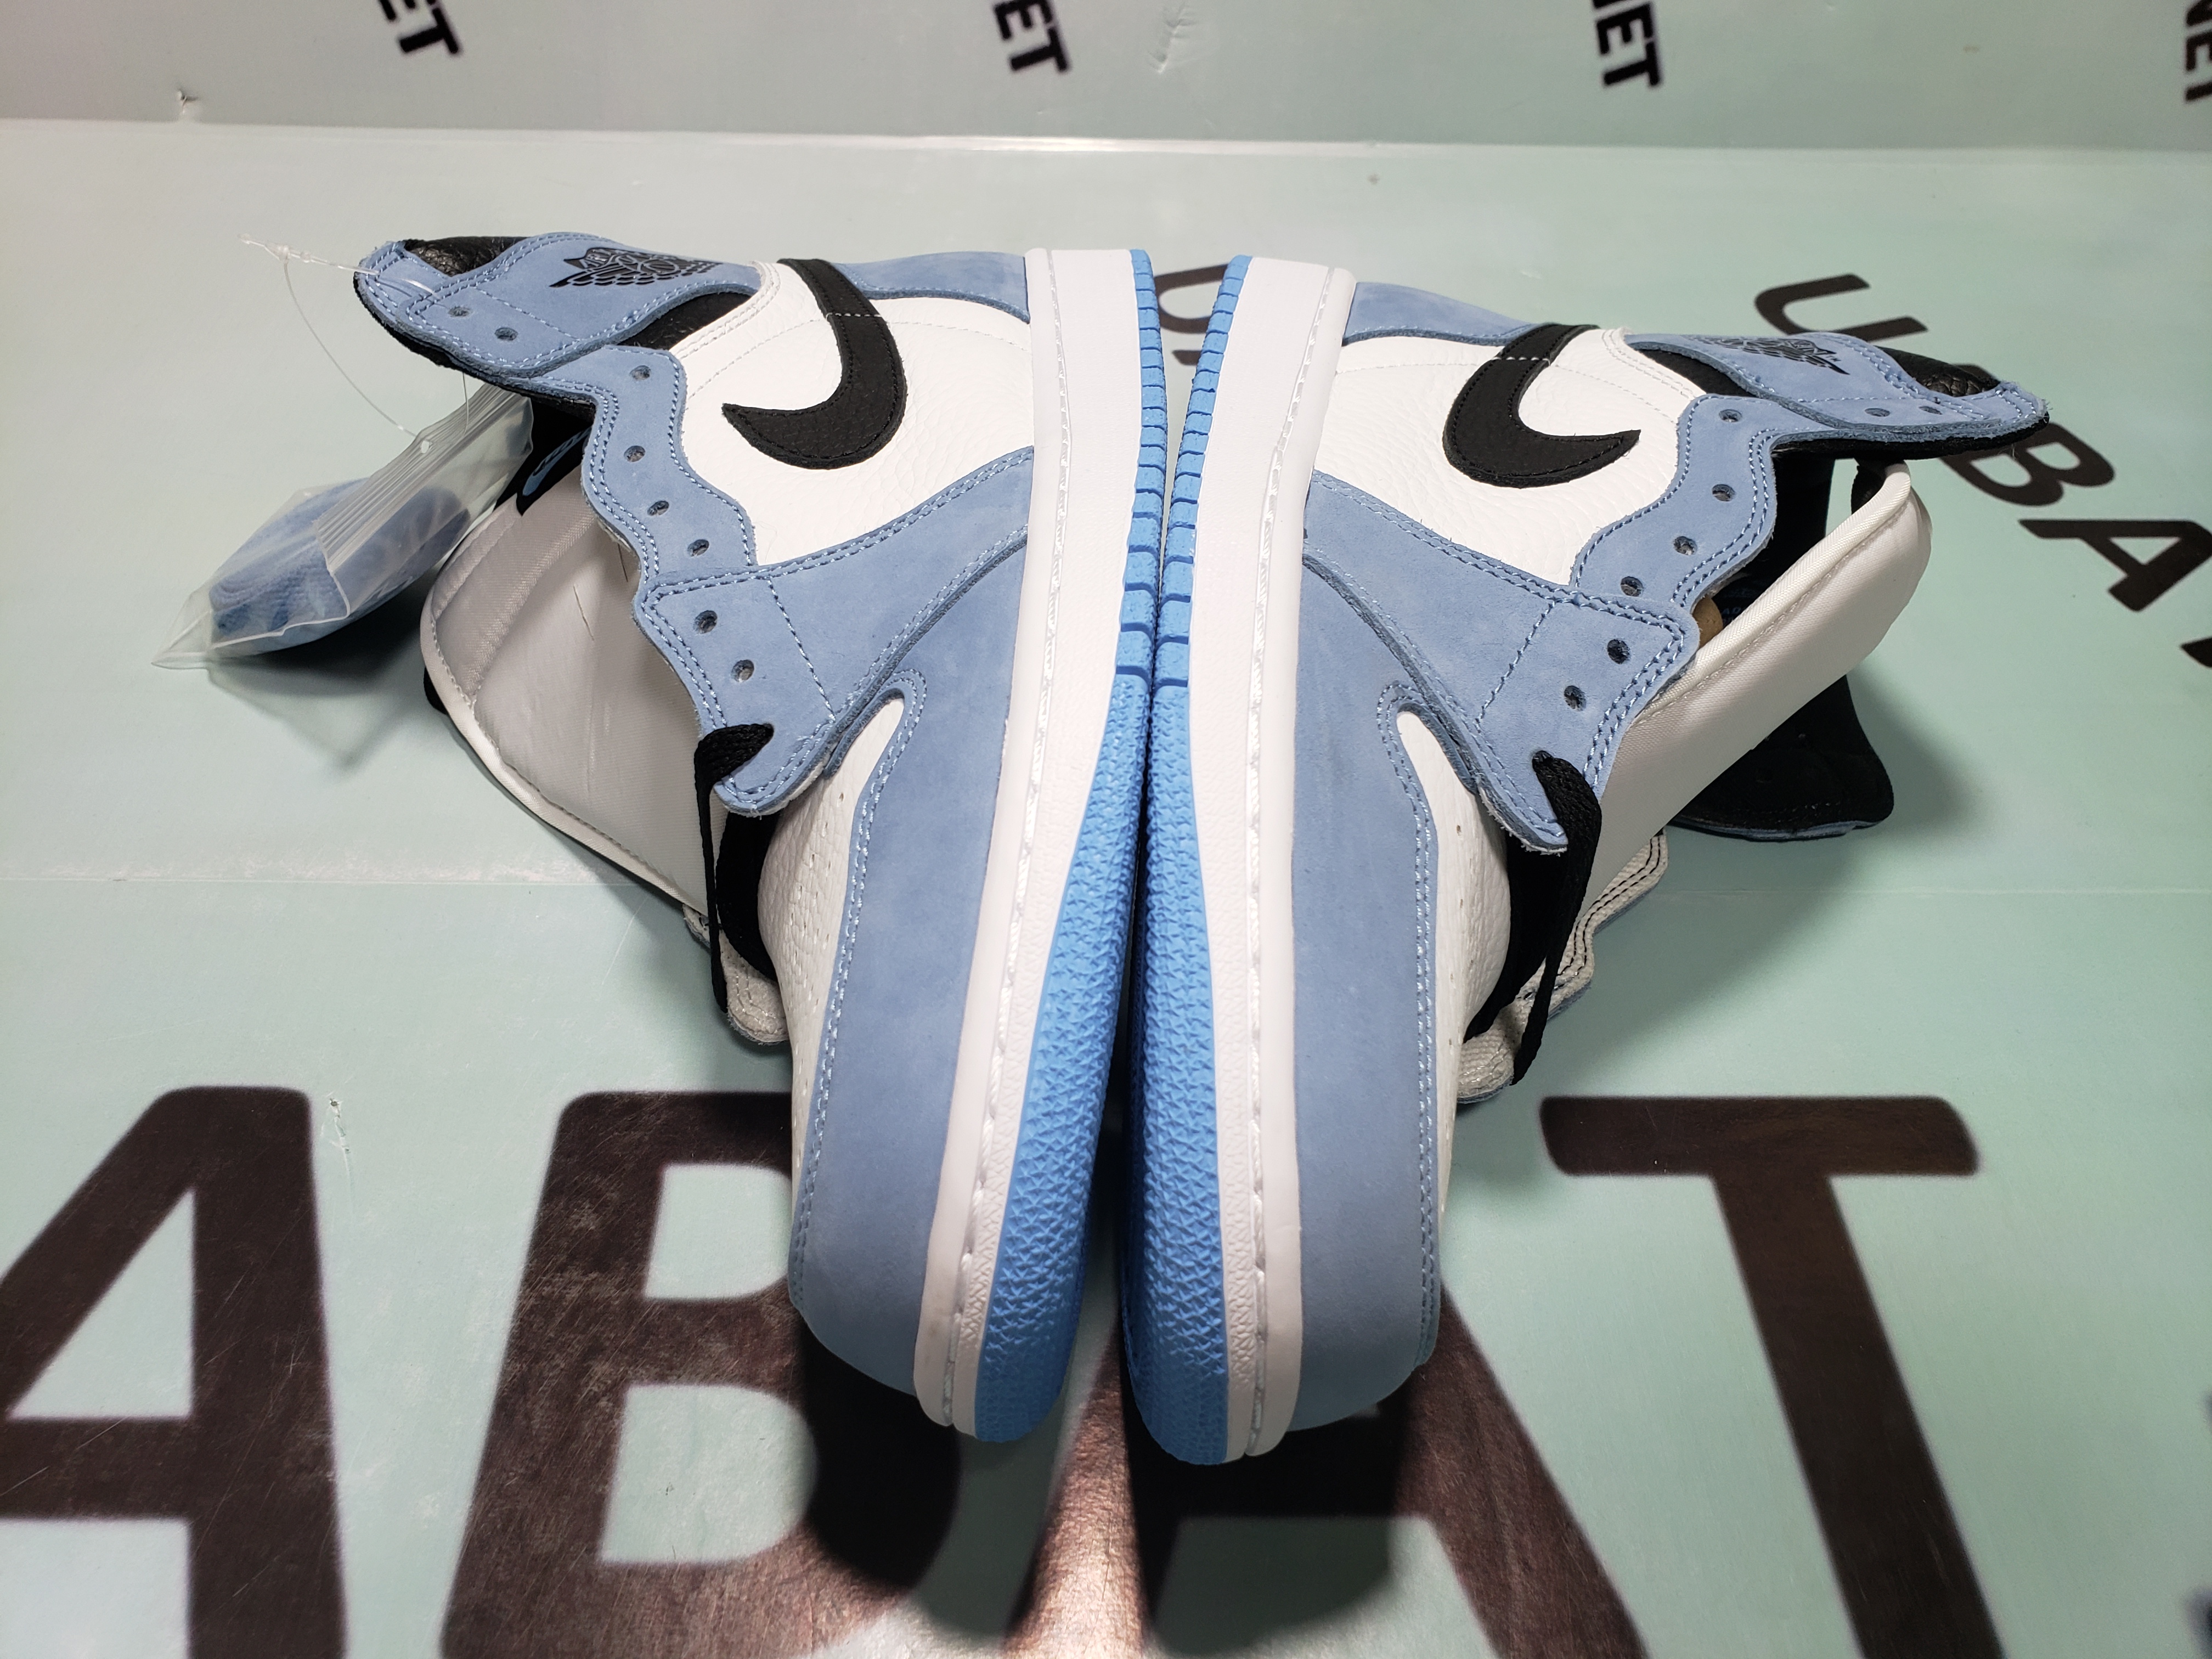 The Travis Scott x Air Jordan 4 Cactus Jack Has Been Spotted At Nike Outlets